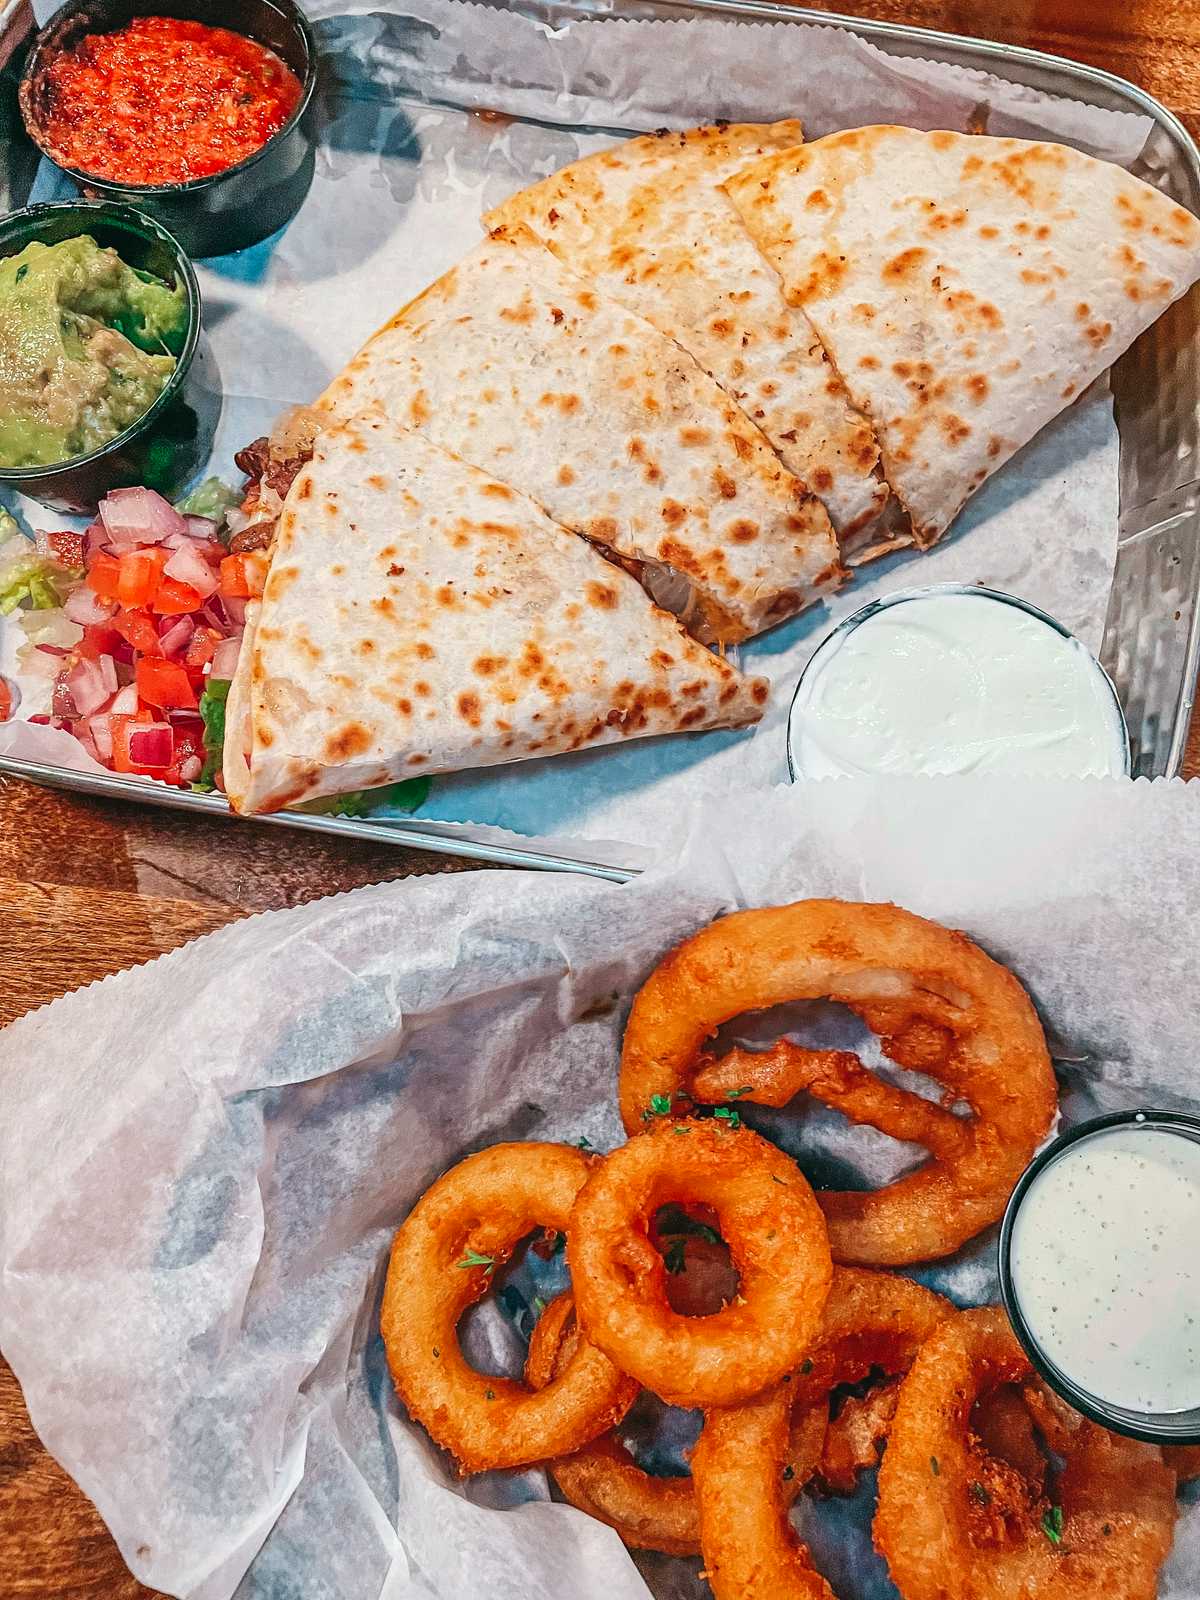 Quesadilla and onion rings from Guilty Sea Sports Pub in IRB